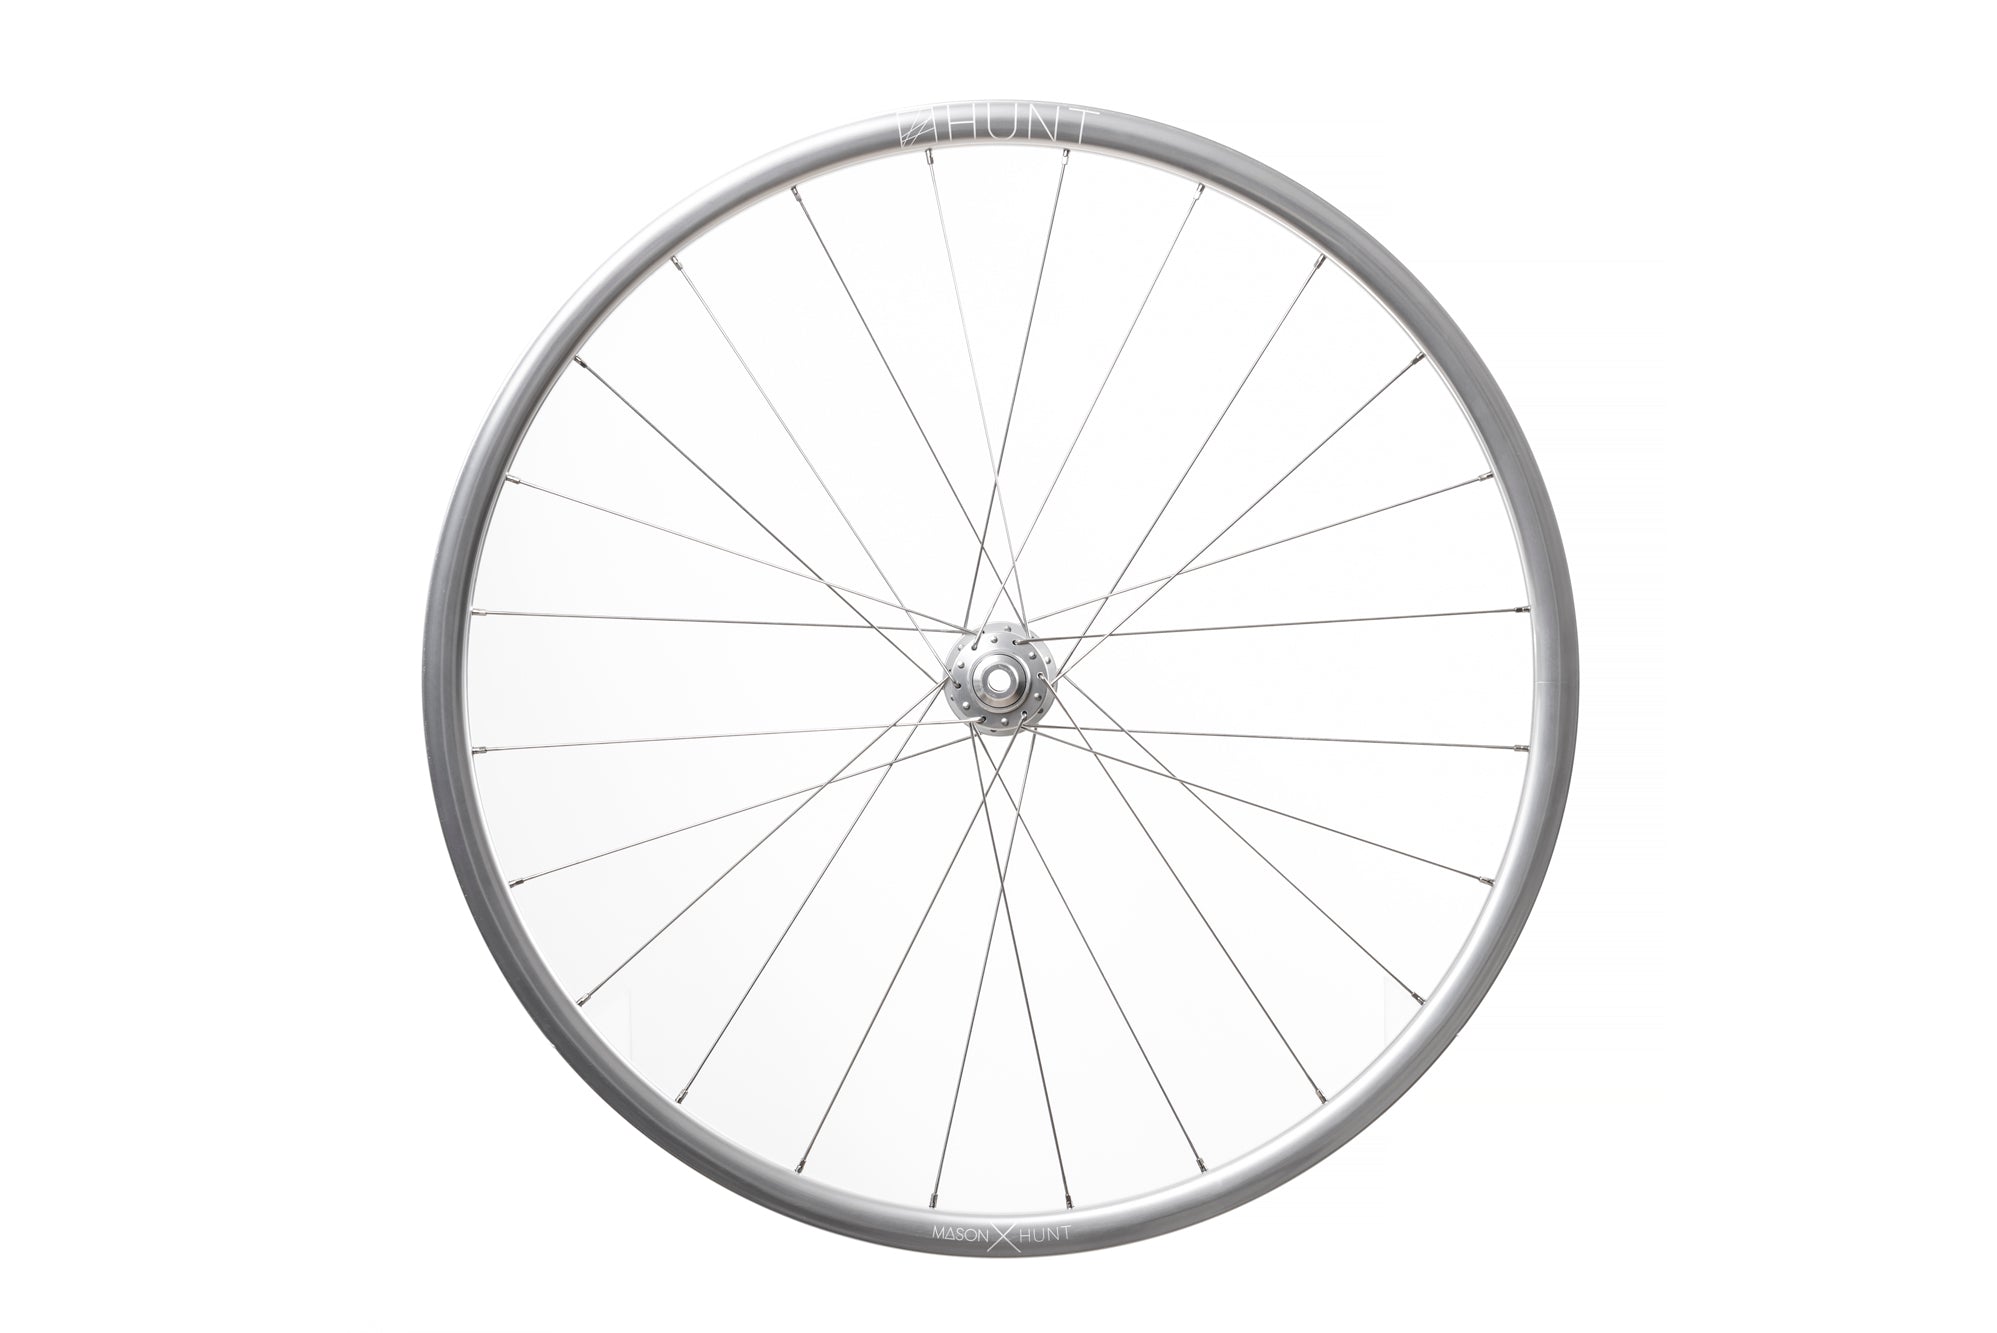 <h1>Rims</h1><i>HFR+ strong and lightweight 6061-T6 heat-treated rim, featuring an asymmetric shape, inverted from front to rear to provide balanced higher spoke tensions meaning your spokes stay tight for the long term. The rim profile is disc specific which allows higher-strength to weight as no reinforcement is required for a braking surface. The extra wide rim at 24mm (19mm internal) which creates a great tyre profile with wider 25-50mm tires, giving excellent grip and lower rolling resistance.</i>